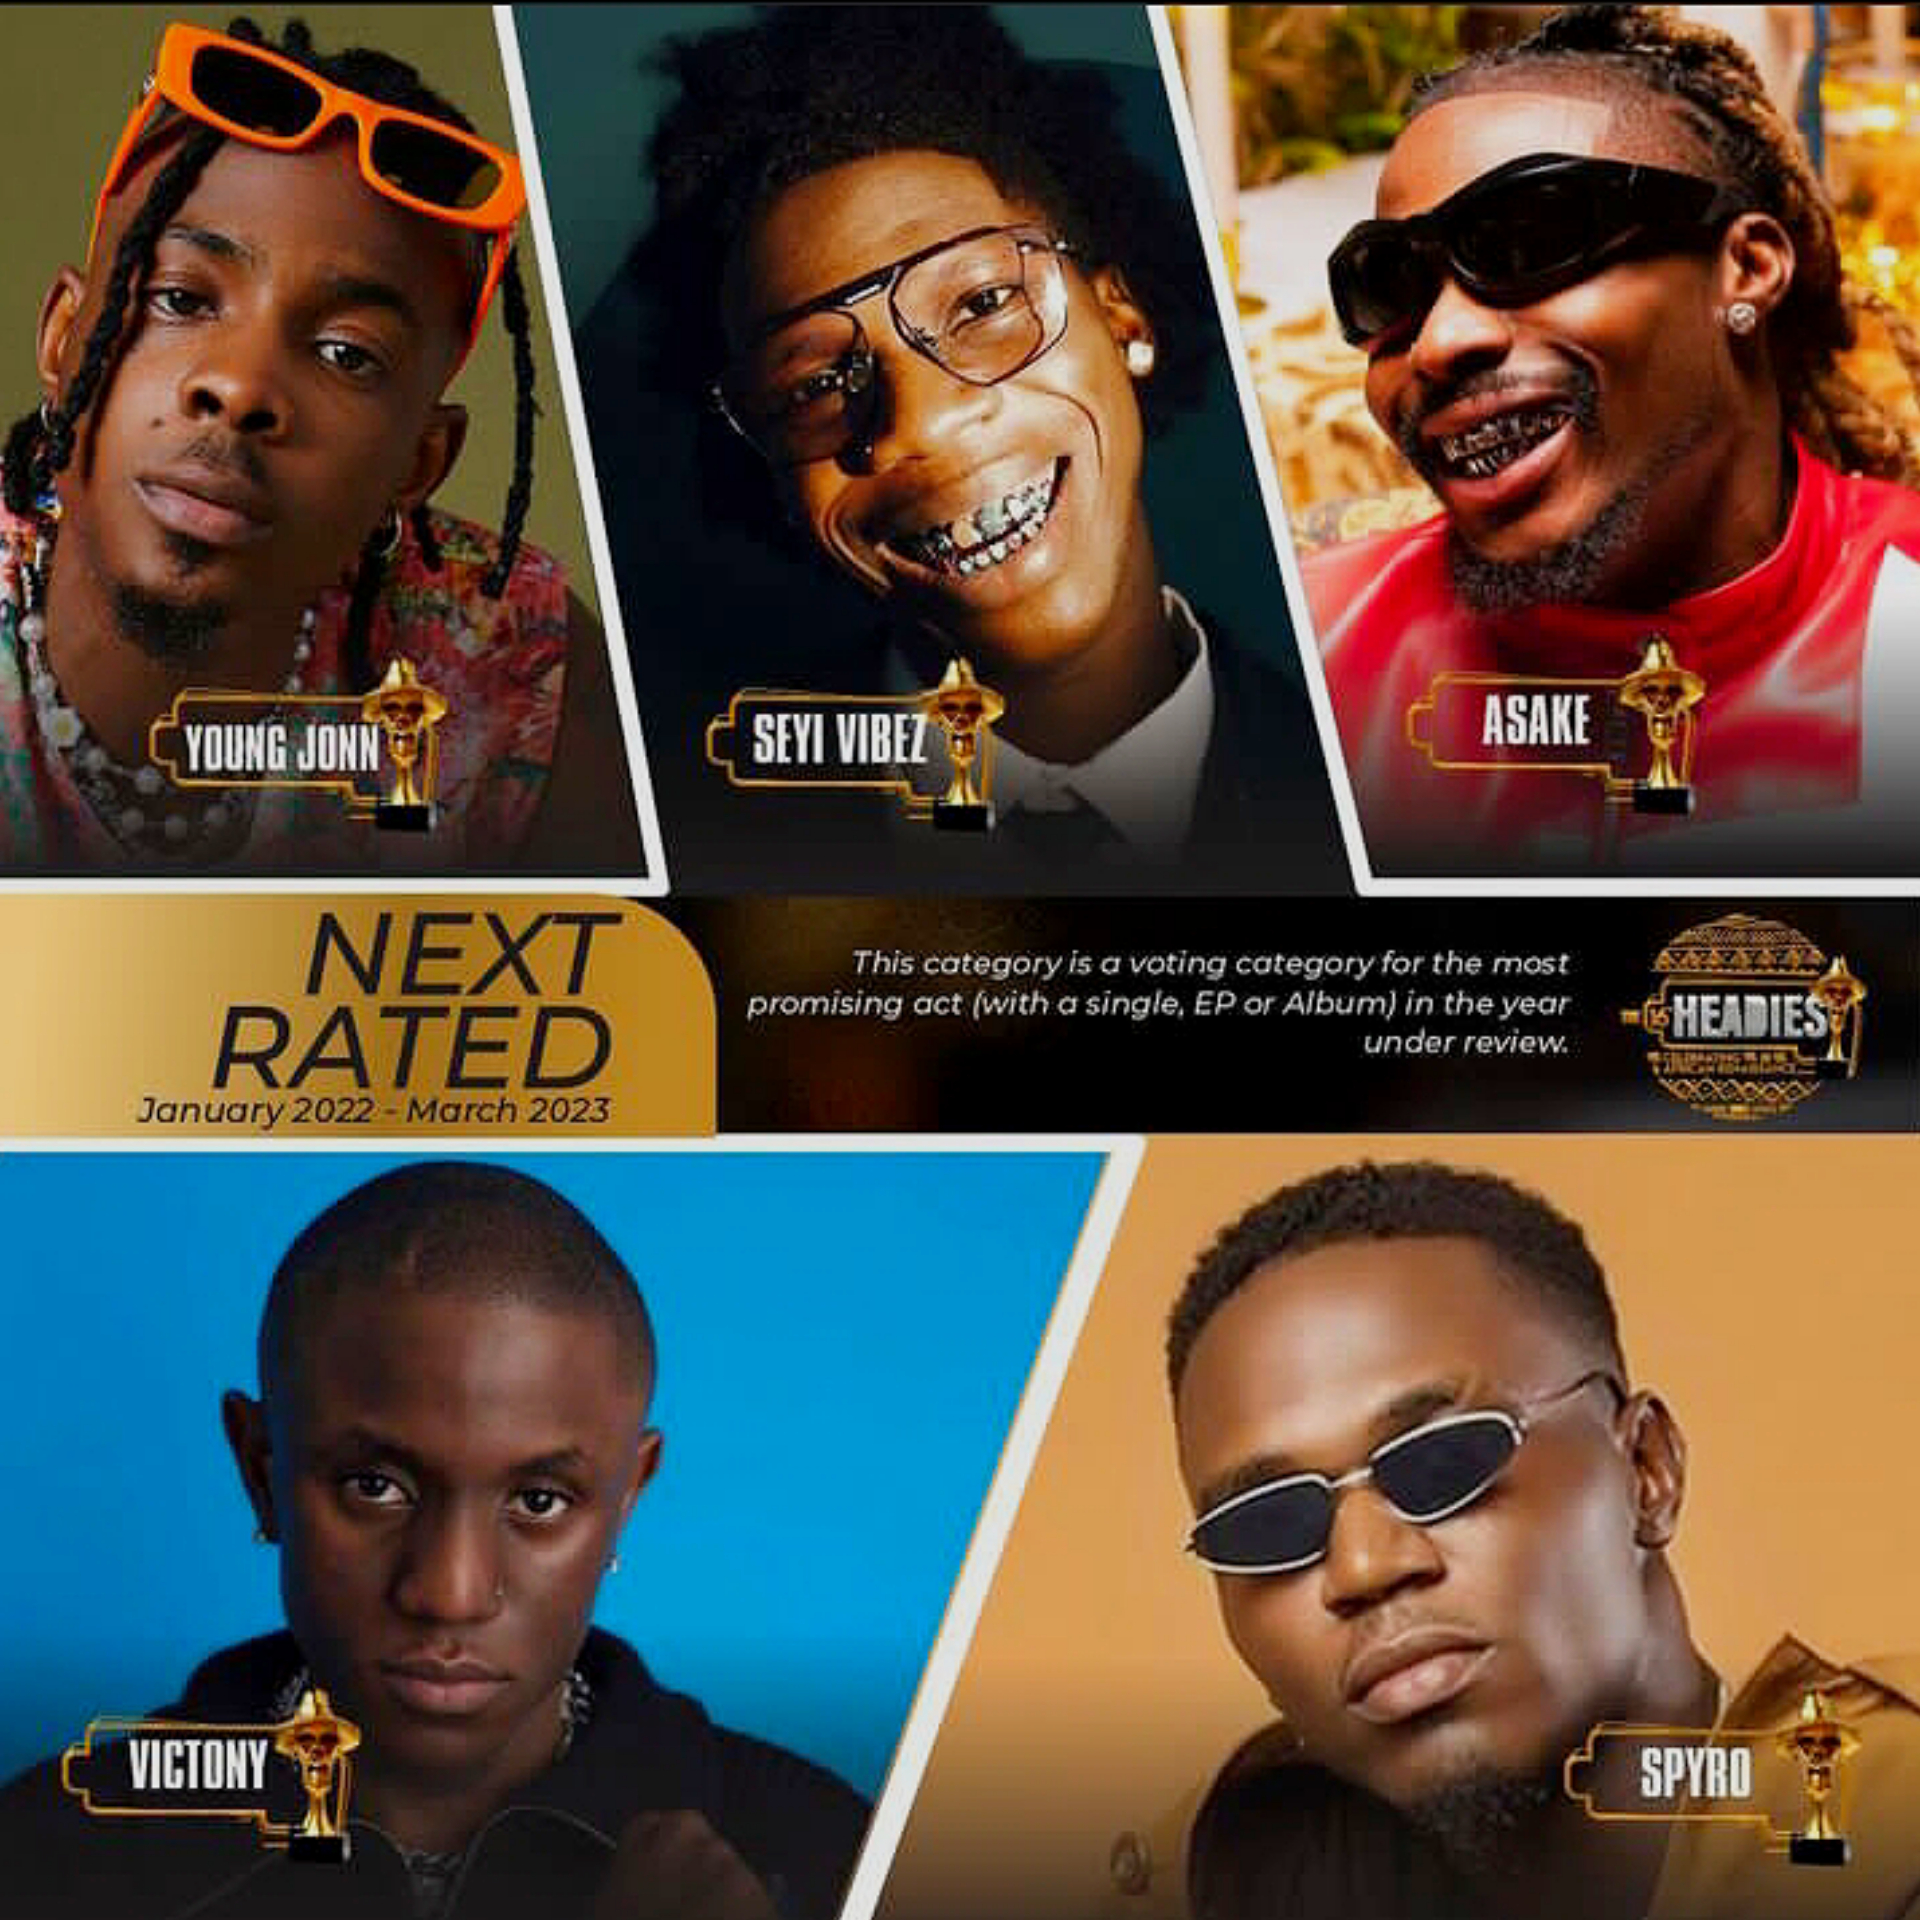 Fans speculate the winner for the Headies Next Rated Award